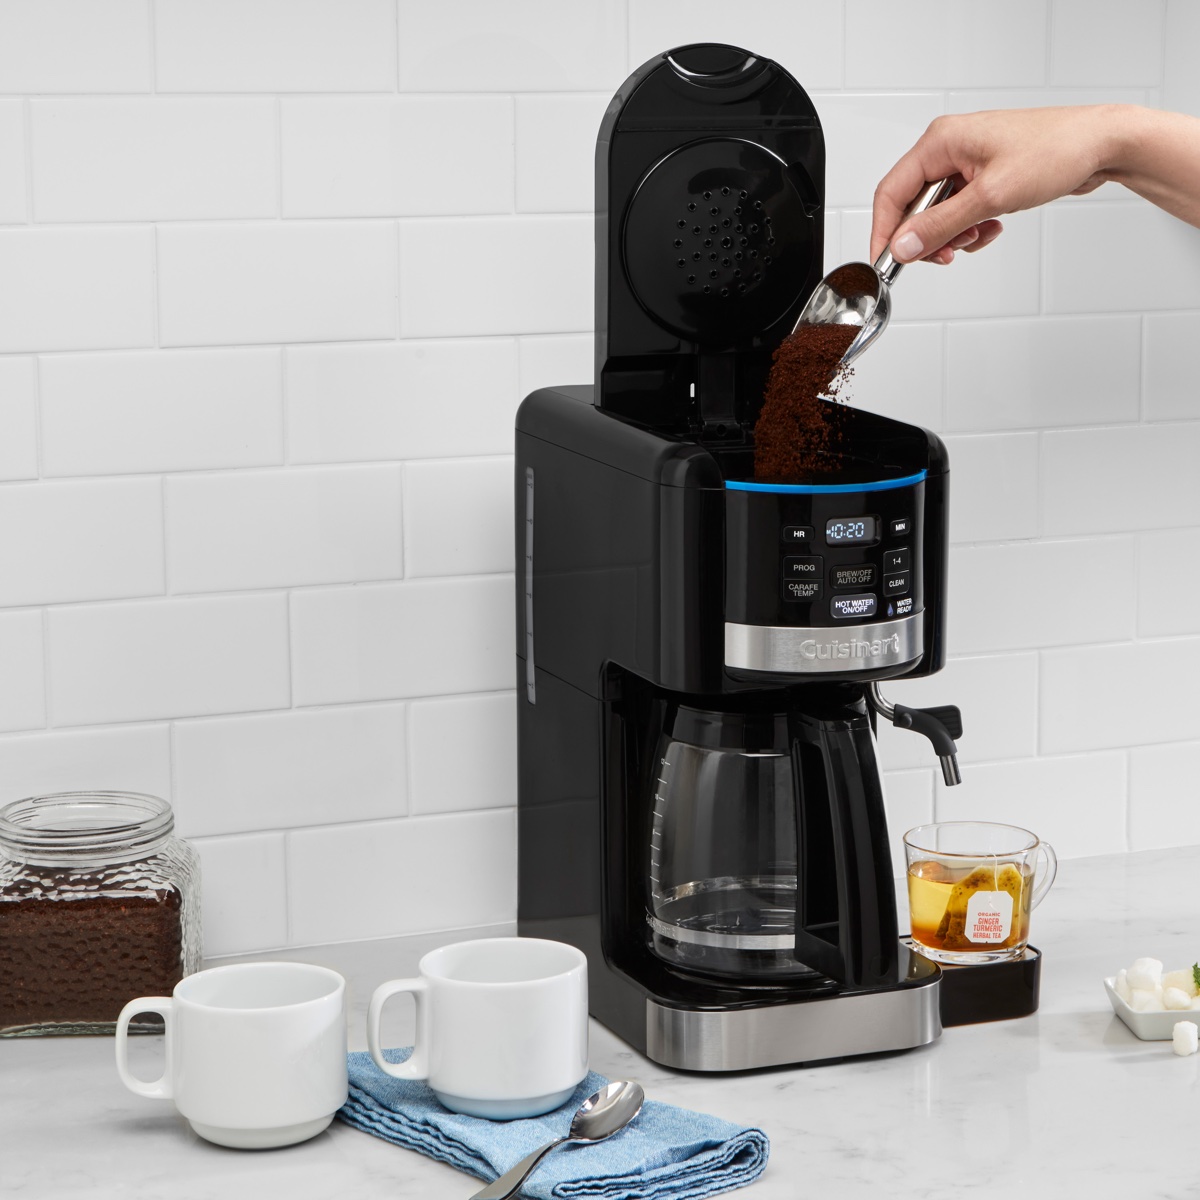 How To Use A Cuisinart Coffee Machine